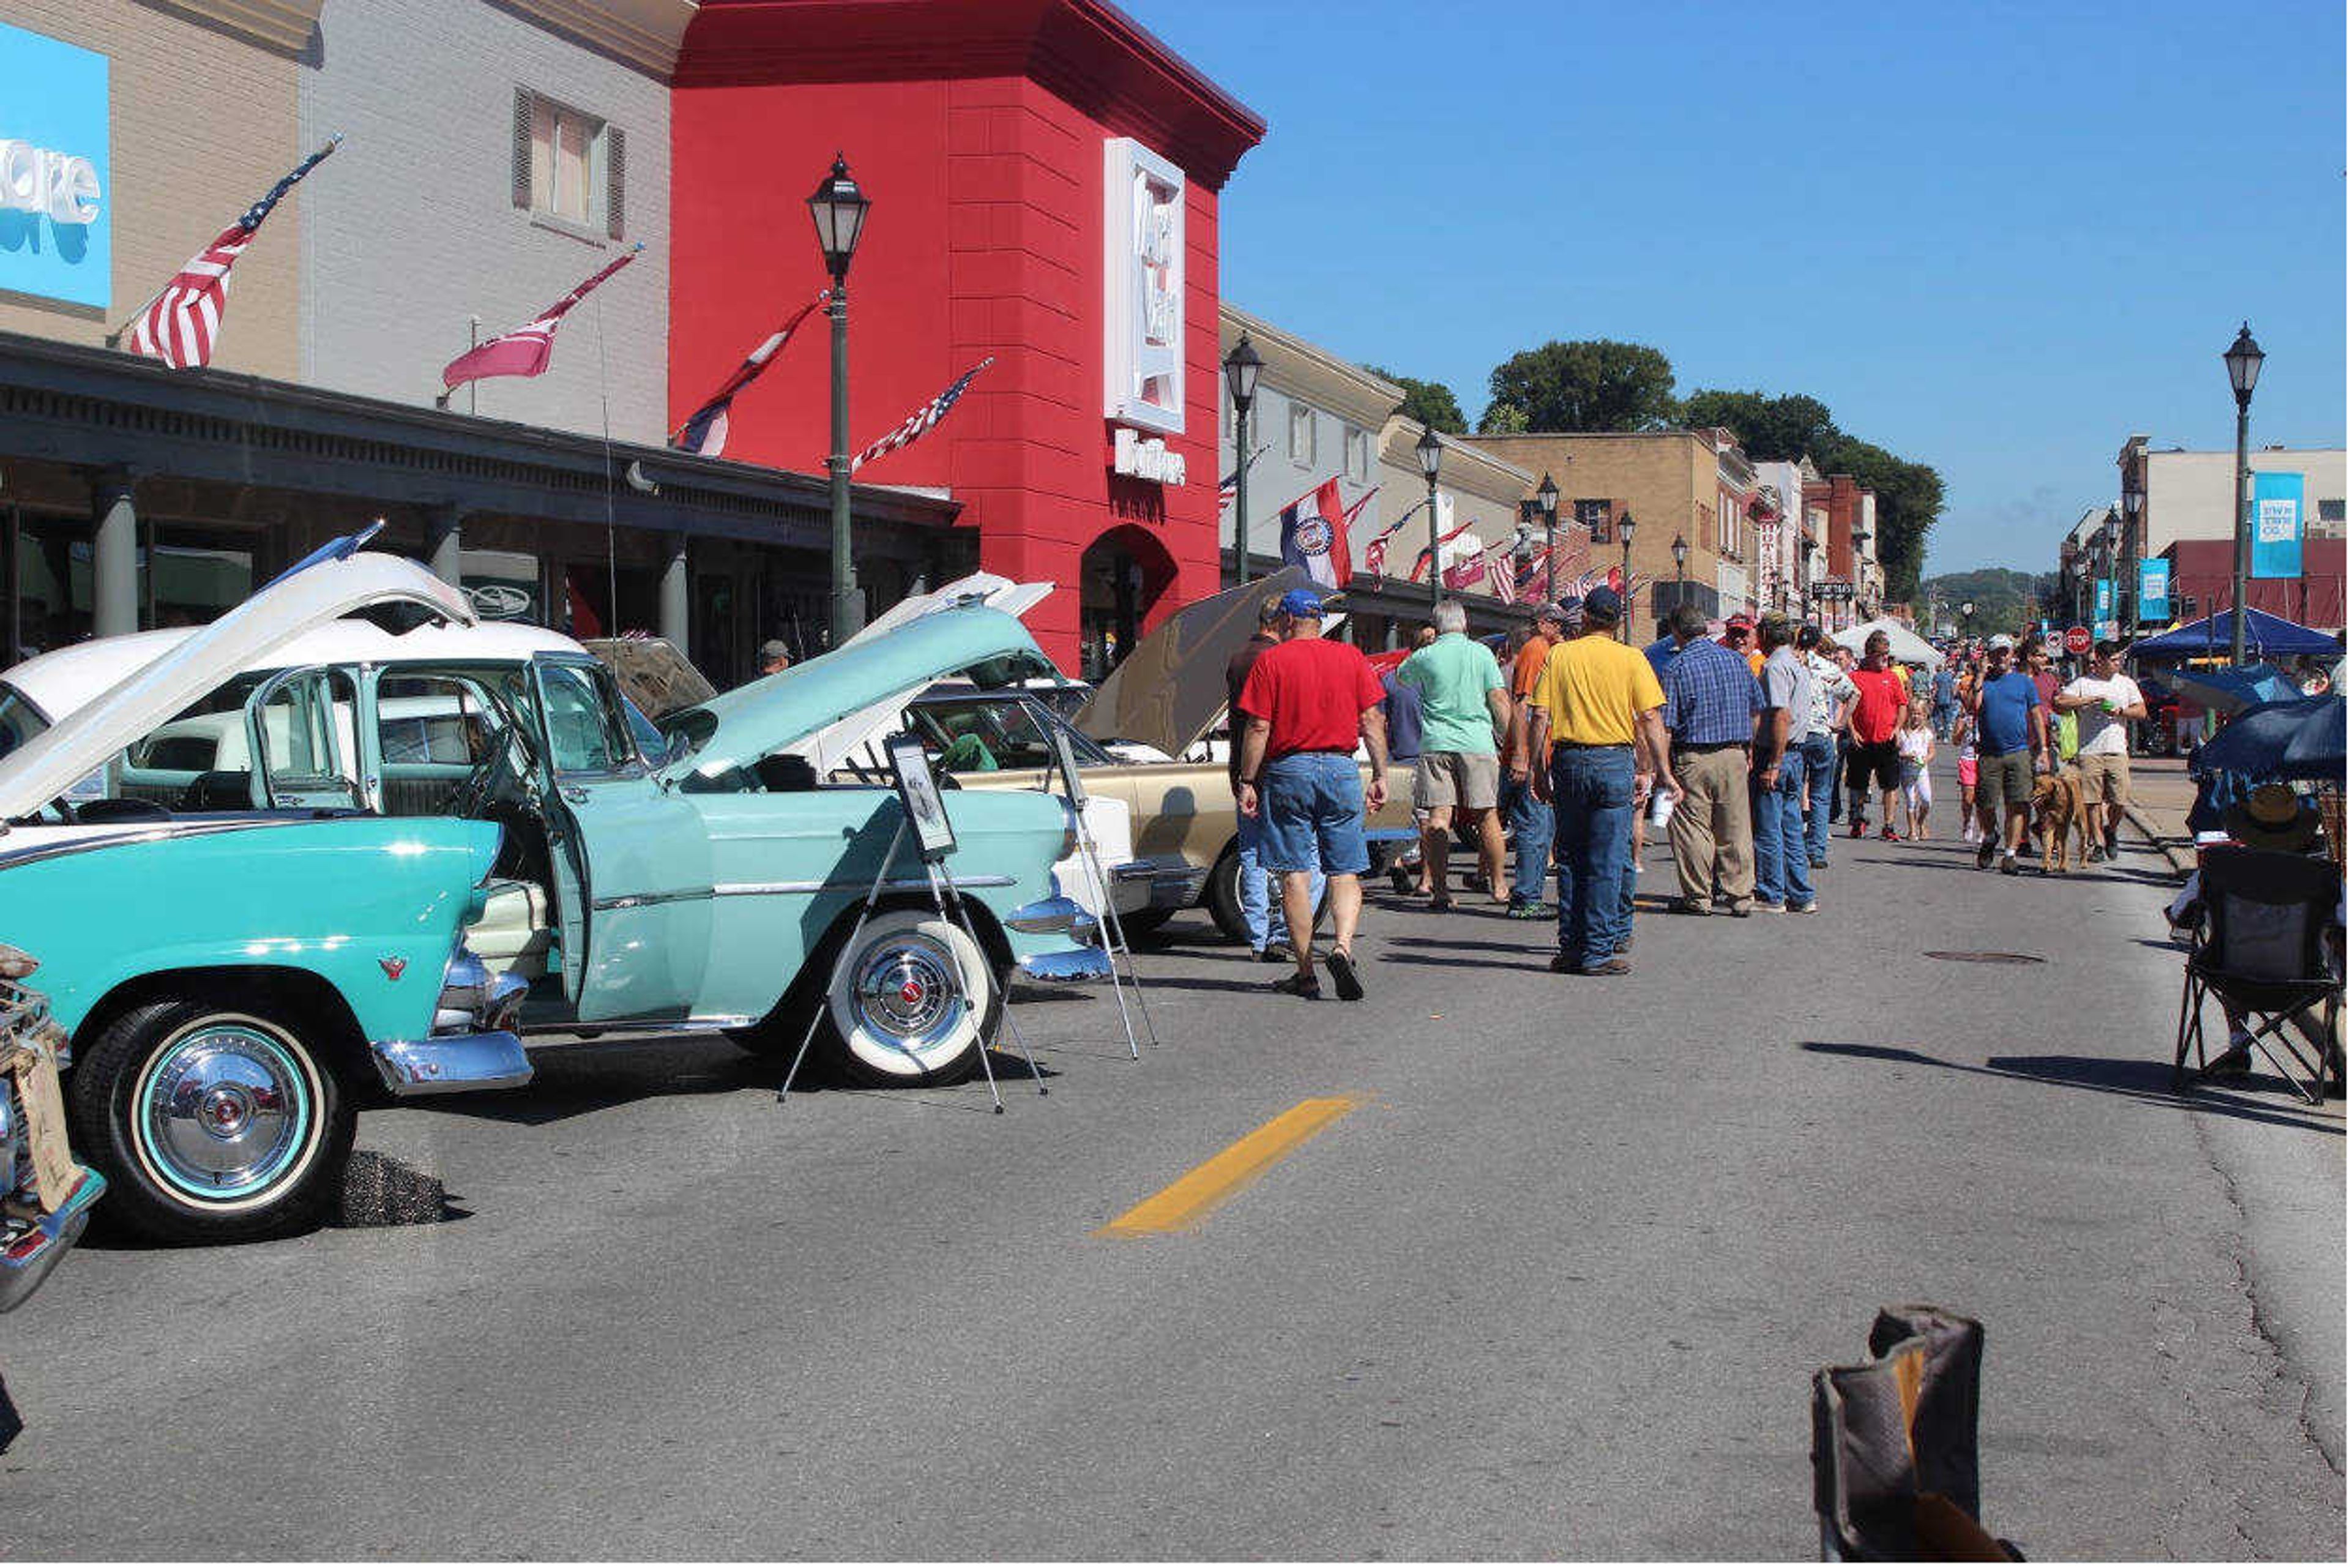 41st Annual car show held in downtown cape